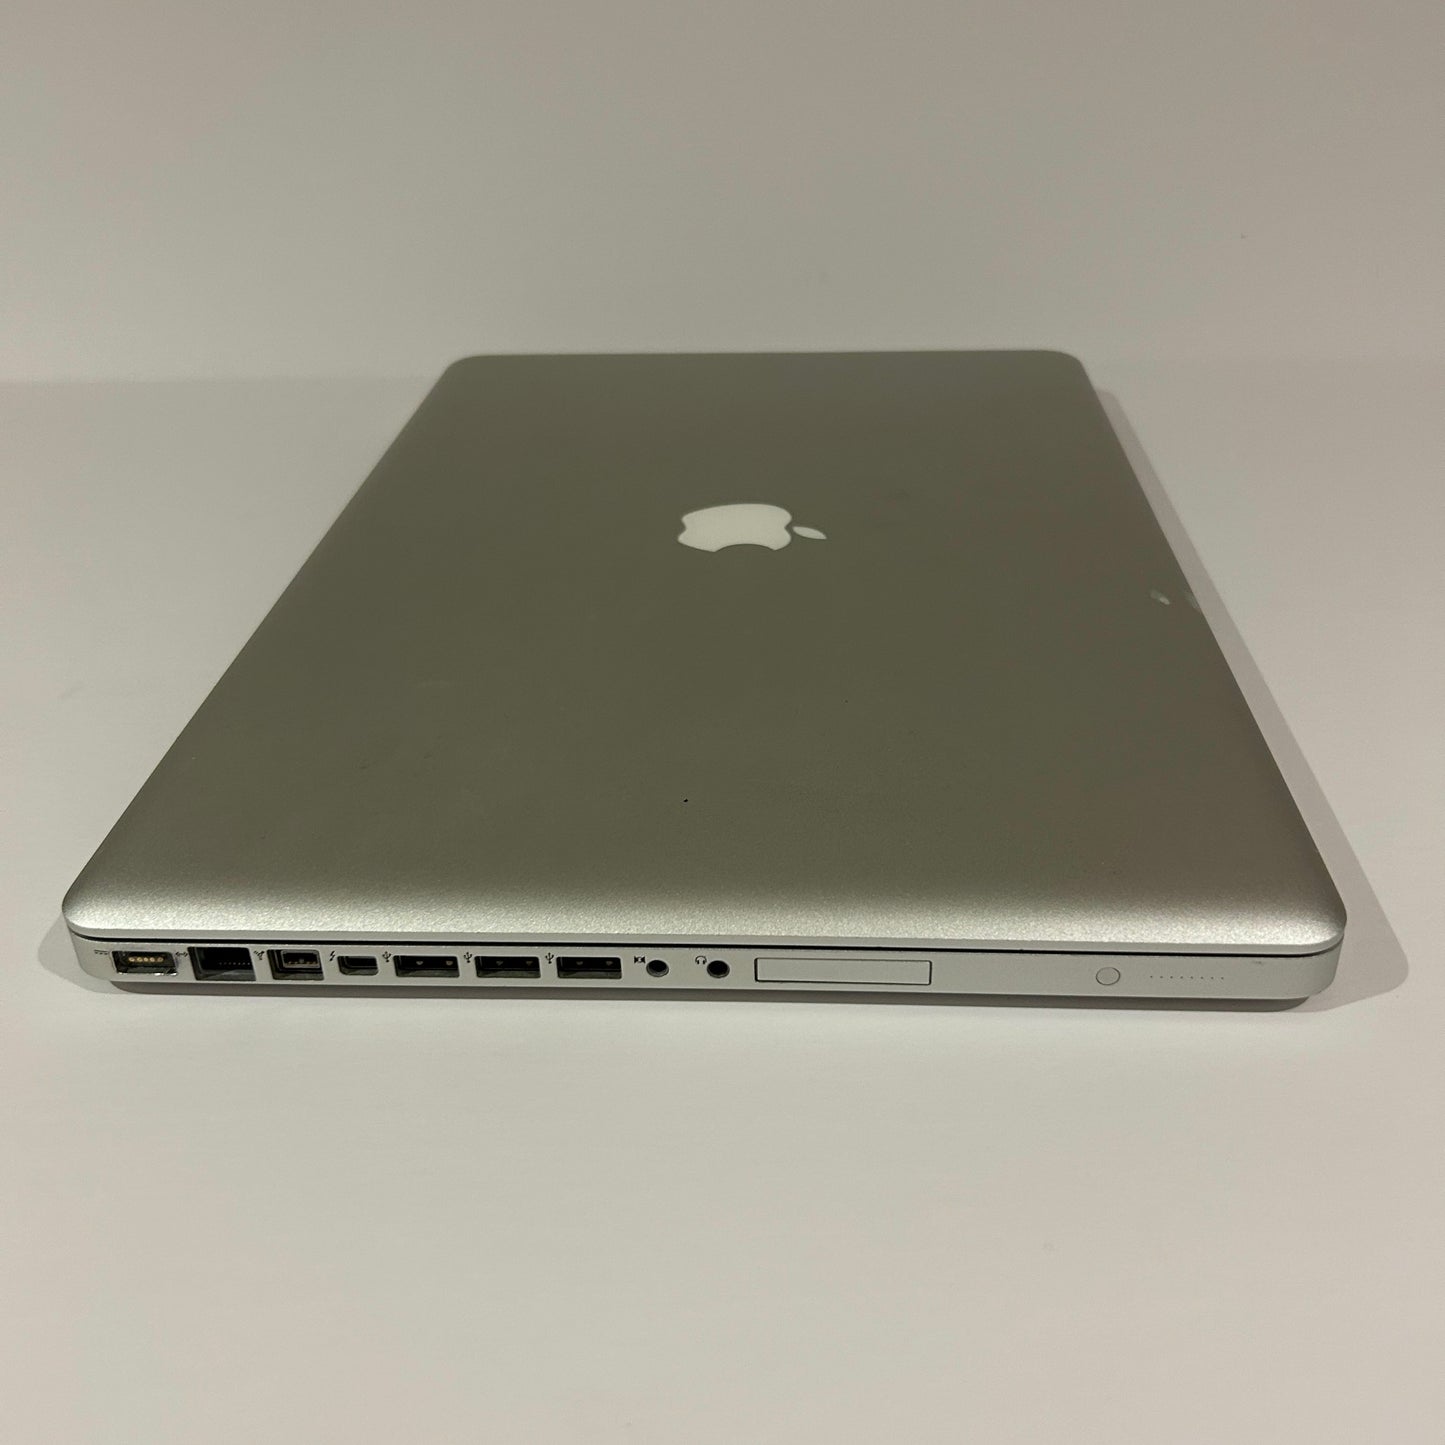 For Parts 17" MacBook Pro "Core i7" 2.4 GHz Late 2011